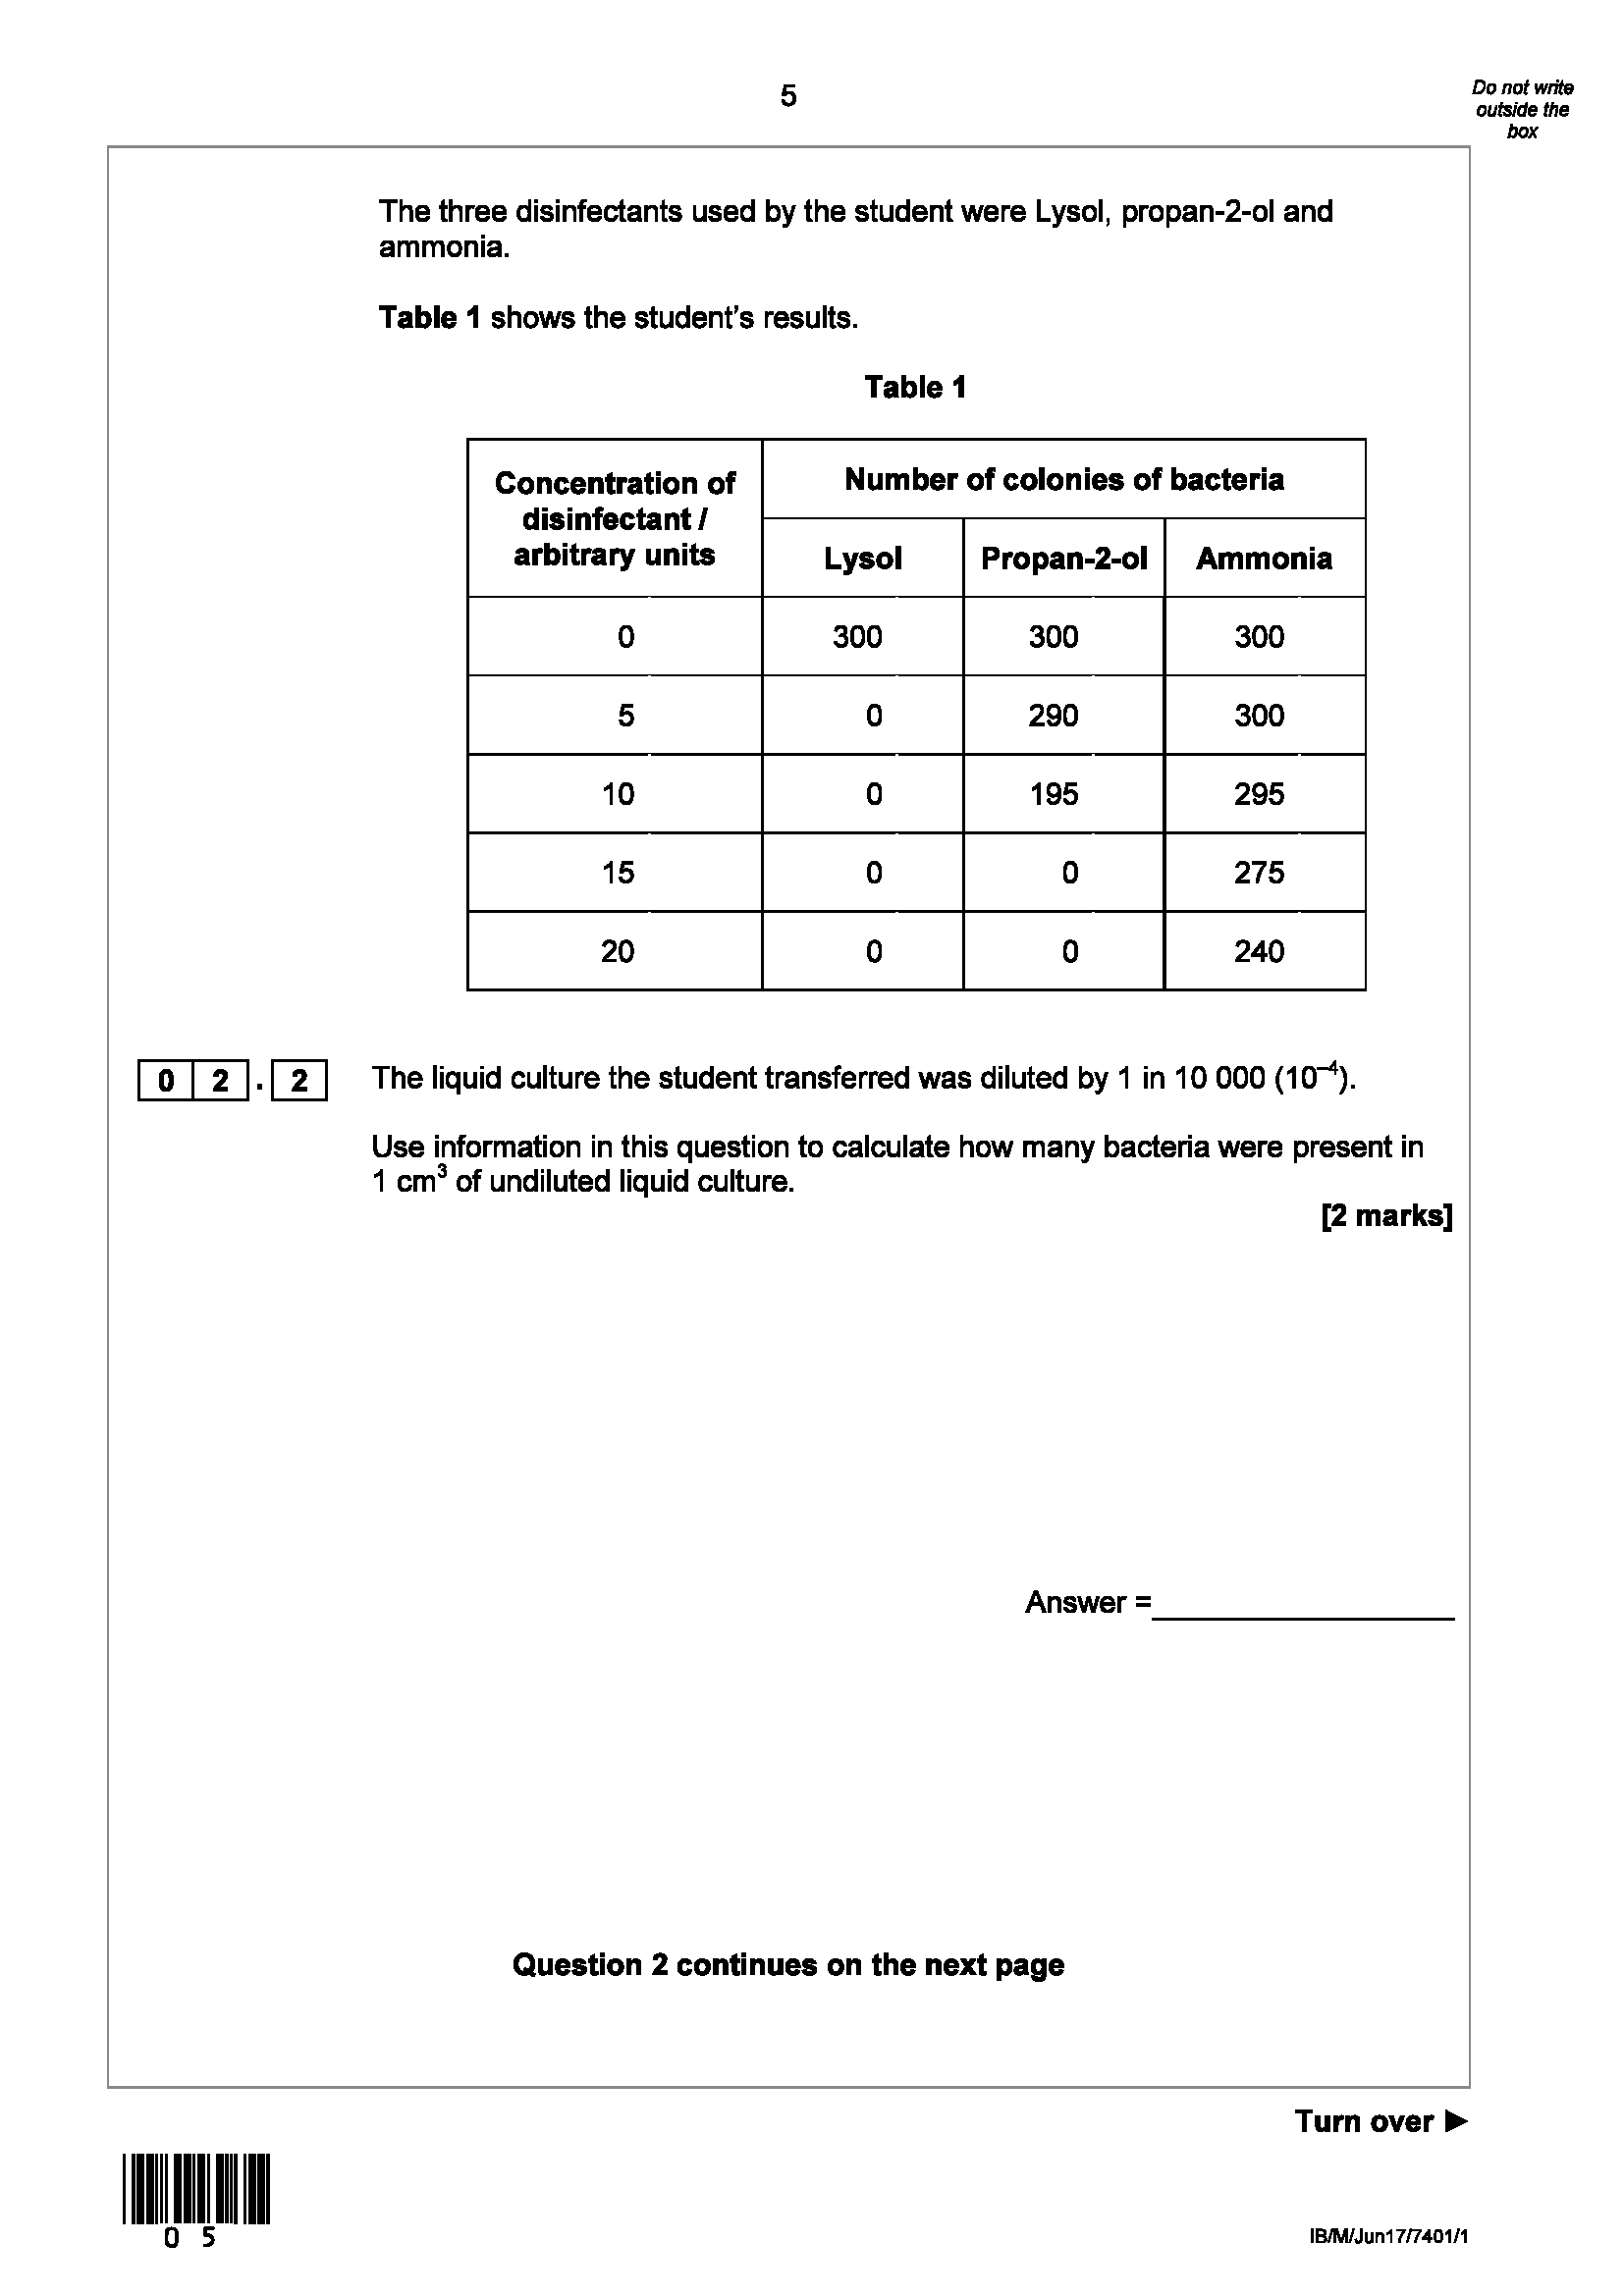 calculationquestionsAQA_Page_20.png